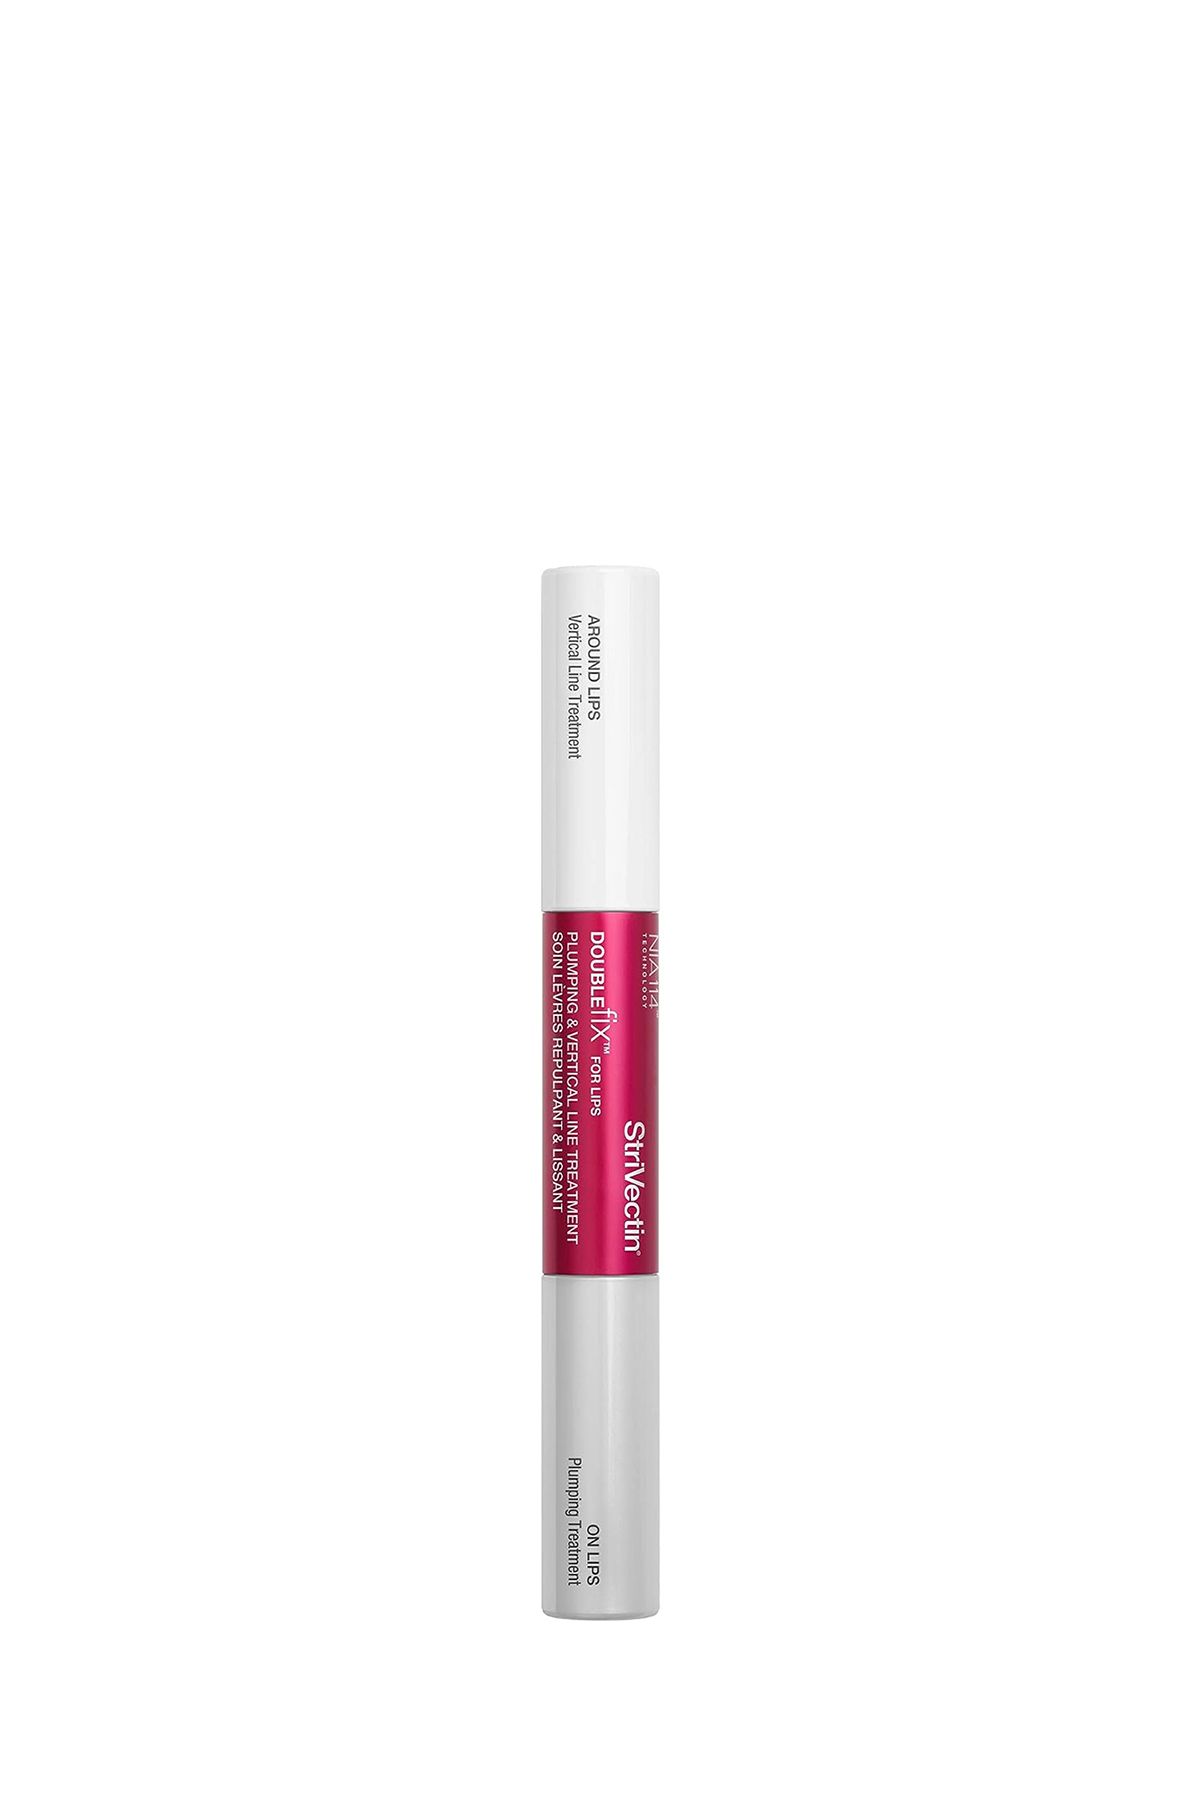 Strivectin Anti Wrinkle Double Fix for Lips Plumping & Vertical Line Treatment 5 ml